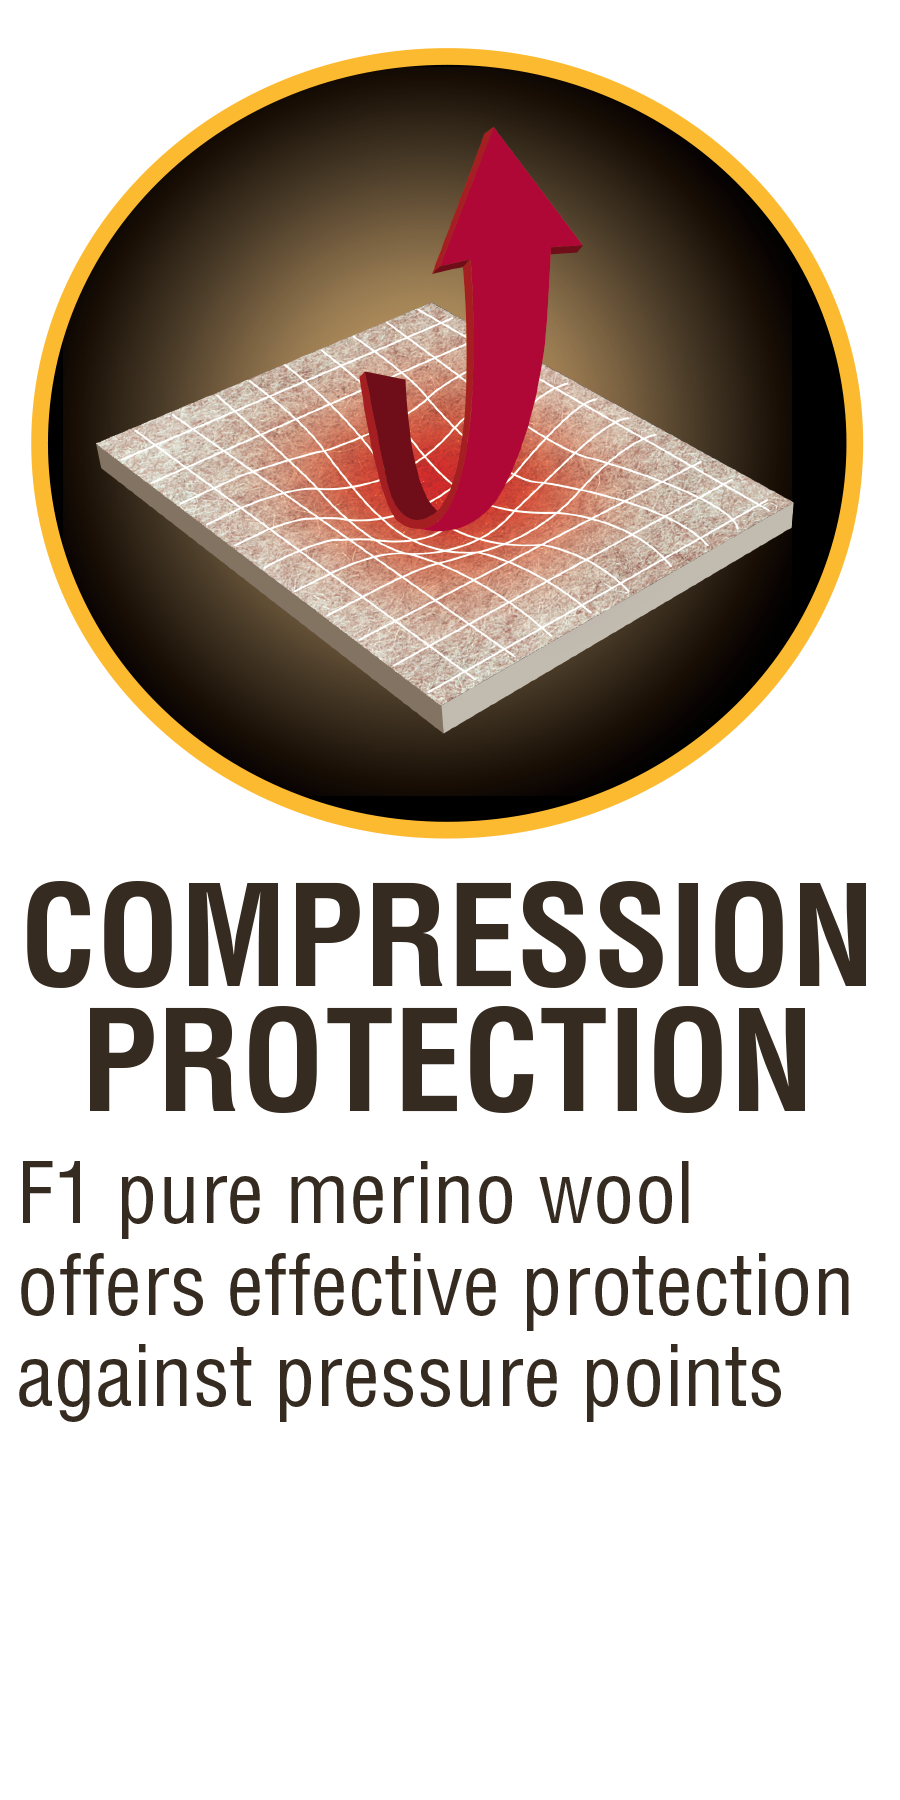 Compression Protection F1 pure merino wool offers effective protection against pressure points